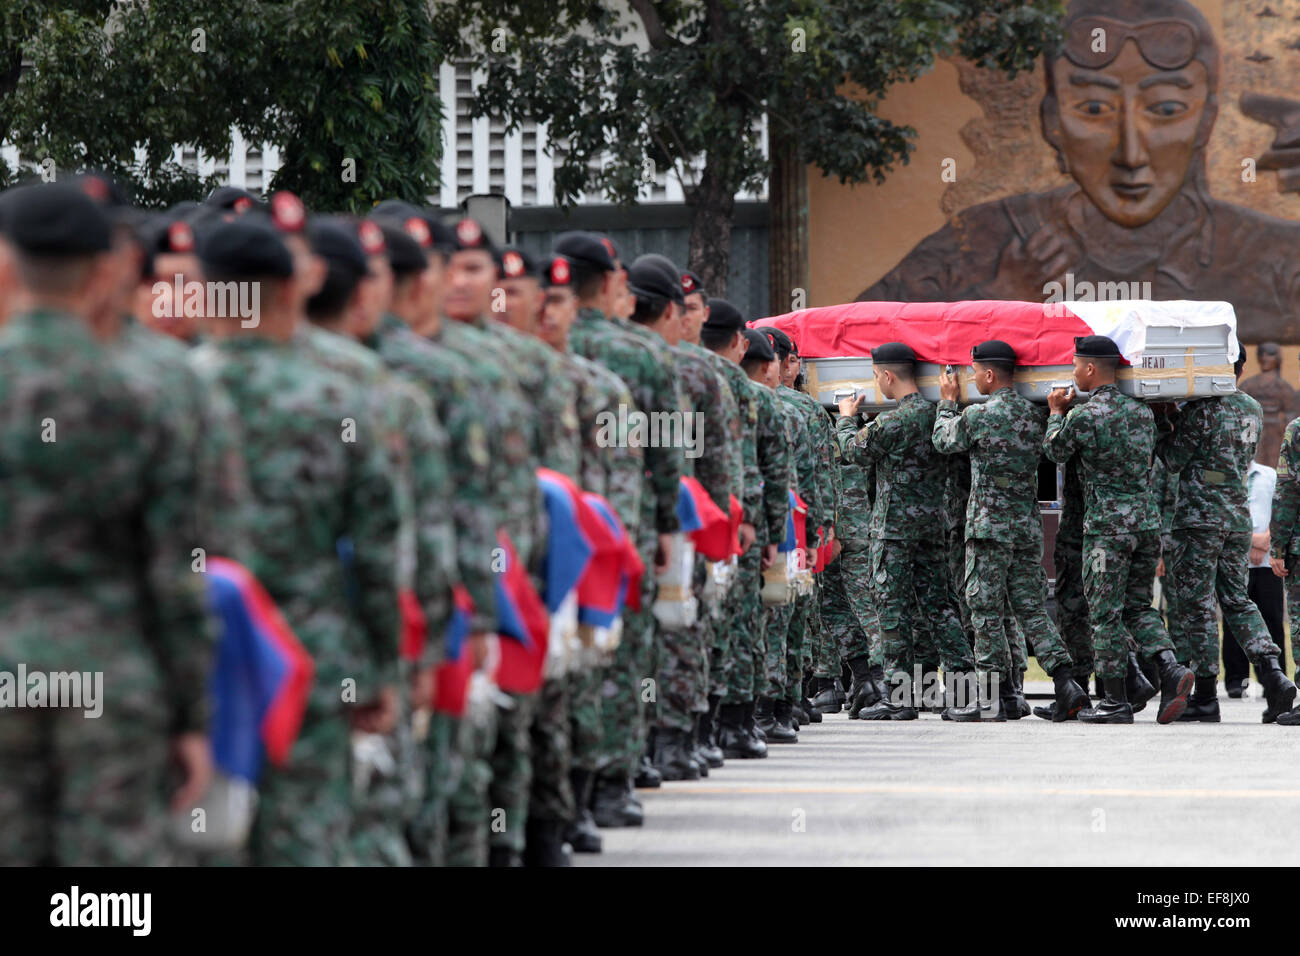 Pasay City, Philippines. 29th Jan, 2015. Members of the Philippine National Police Special Action Force (PNP-SAF) carry the caskets of their fallen comrades at the Villamor Air Base in Pasay City, the Philippines, Jan. 29, 2015. Forty-four members of the PNP-SAF were killed allegedly by Moro Islamic Liberation Front and Bangsamoro Islamic Freedom Fighters members on Jan. 25 in Mamasapano, Maguindanao. Credit:  Rouelle Umali/Xinhua/Alamy Live News Stock Photo